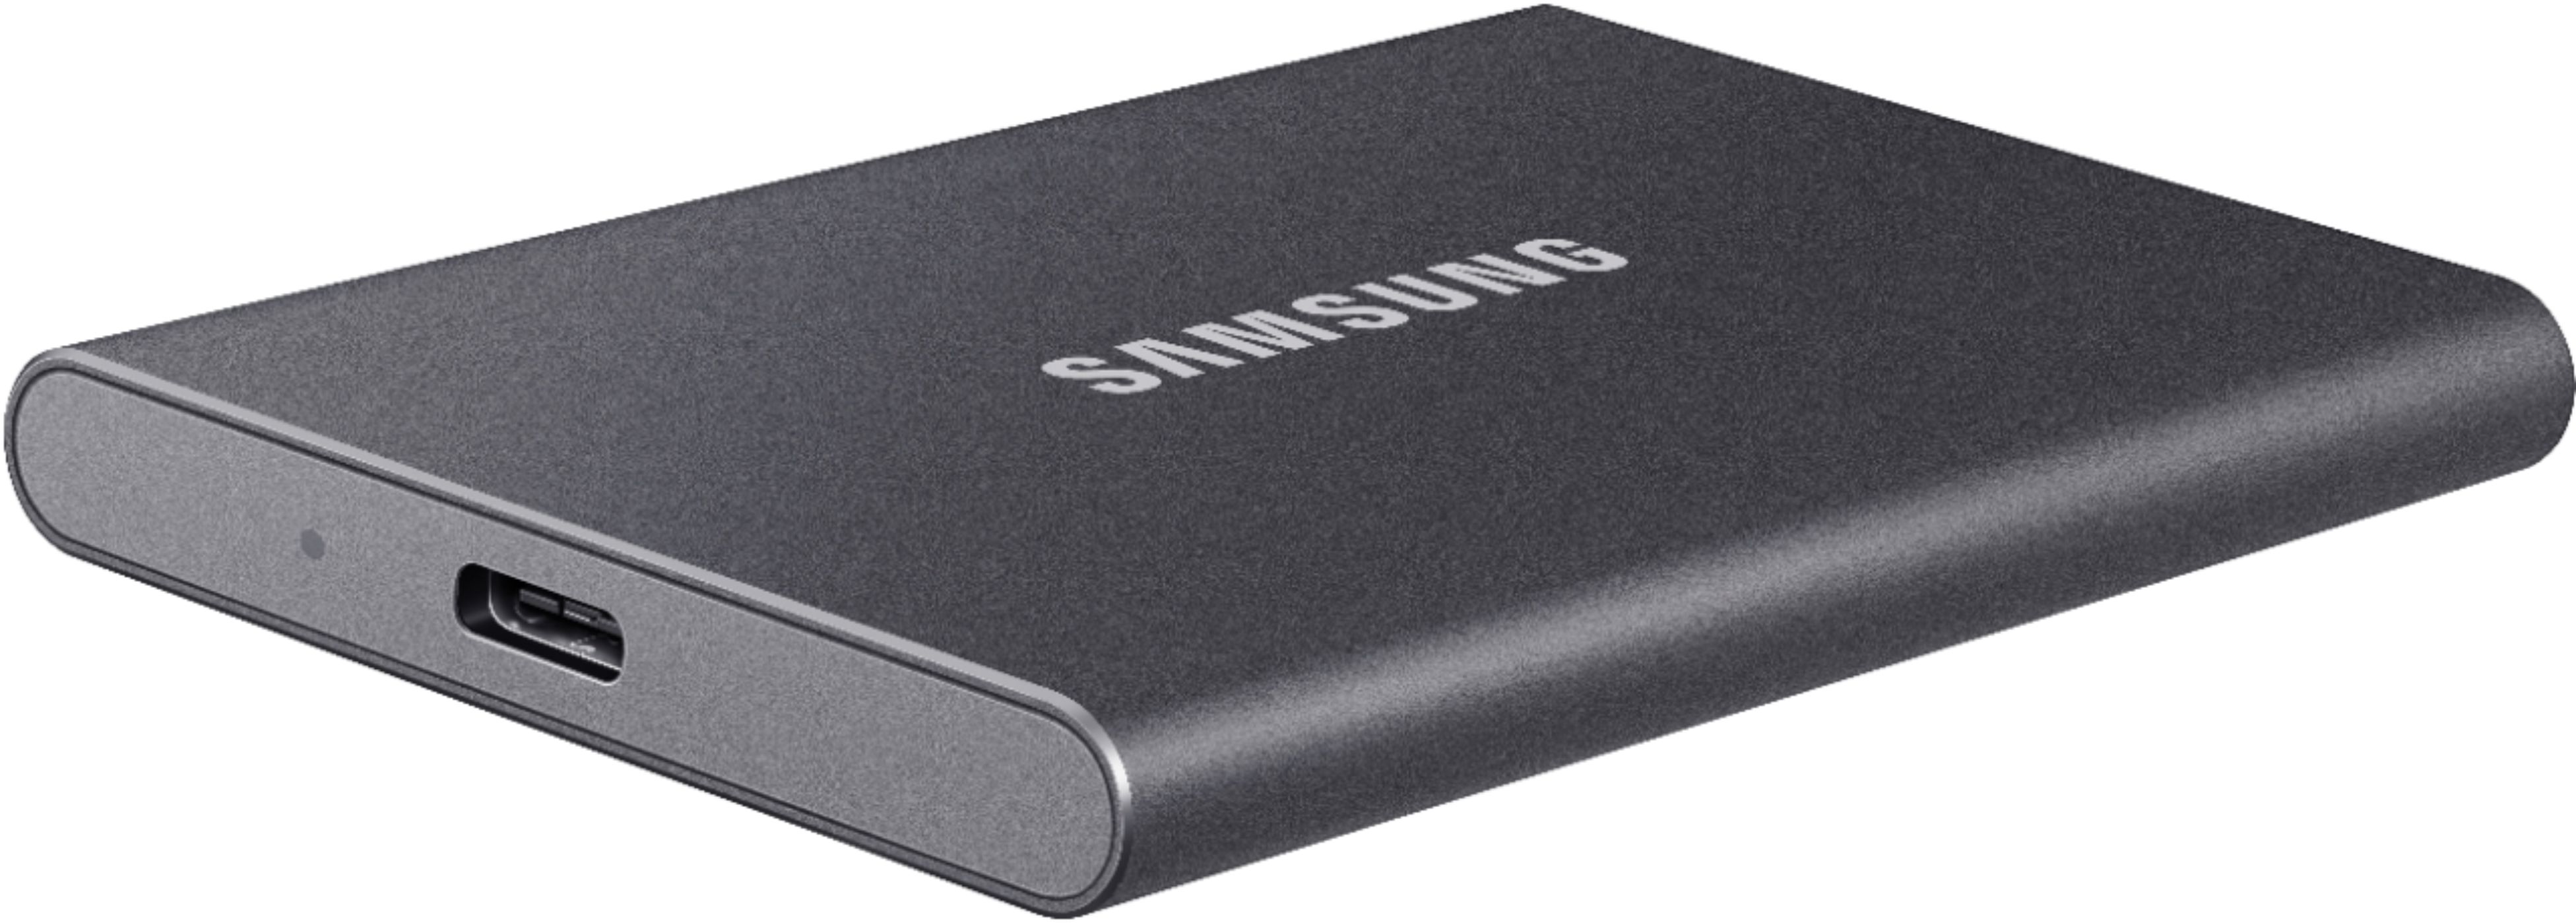 Samsung T7 2TB External USB 3.2 Gen 2 Portable SSD with Hardware